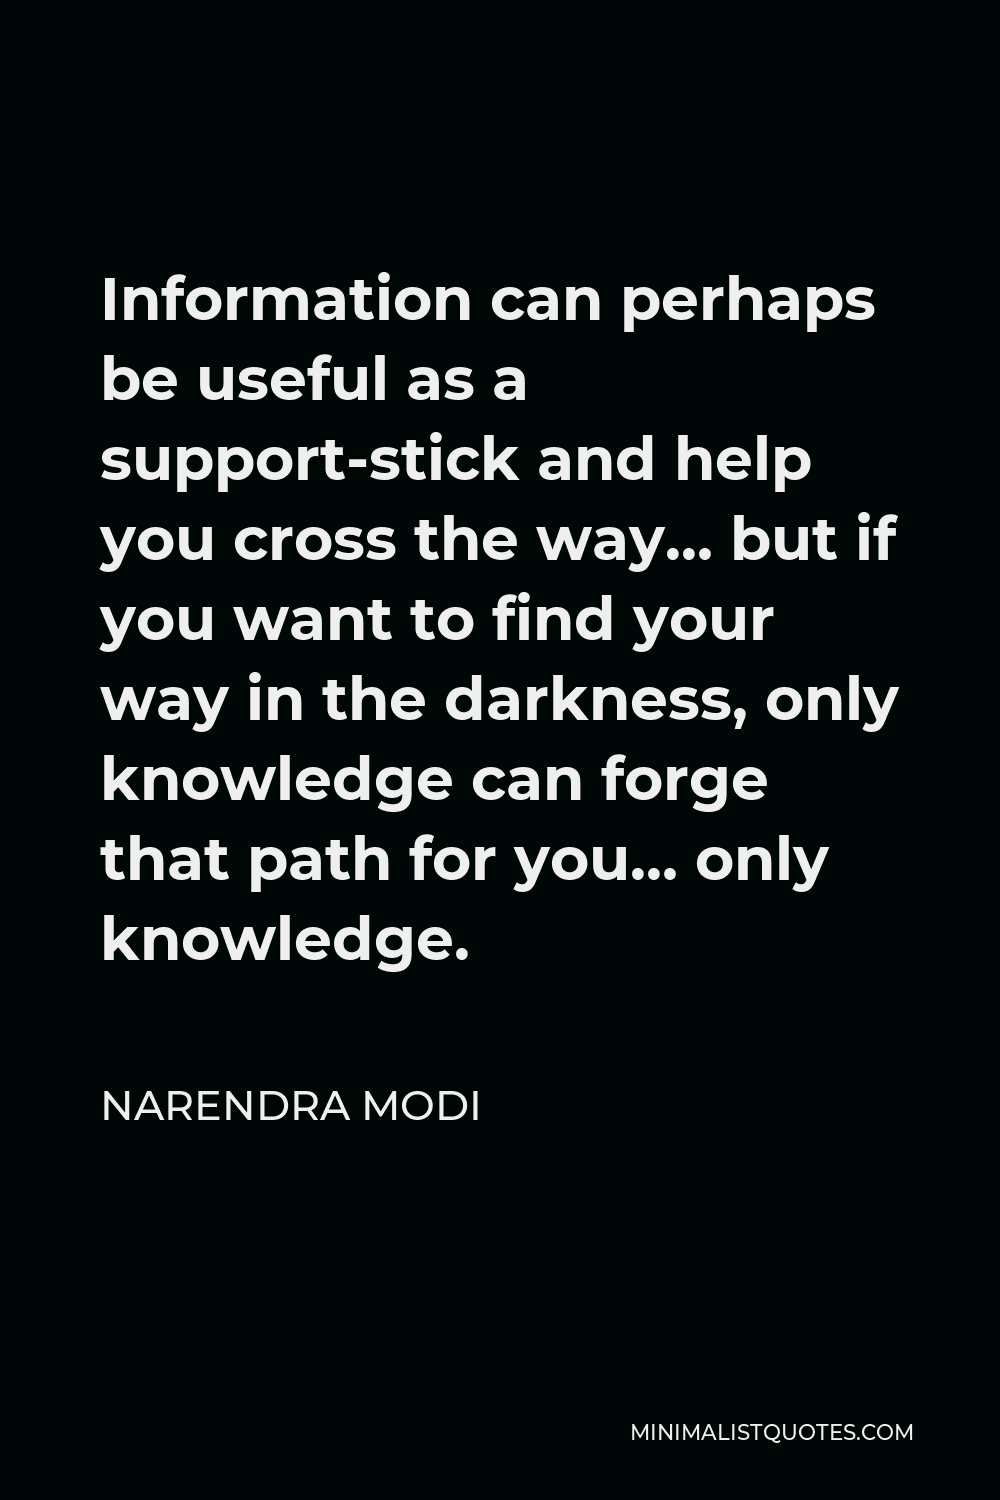 Narendra Modi Quote - Information can perhaps be useful as a support-stick and help you cross the way… but if you want to find your way in the darkness, only knowledge can forge that path for you… only knowledge.